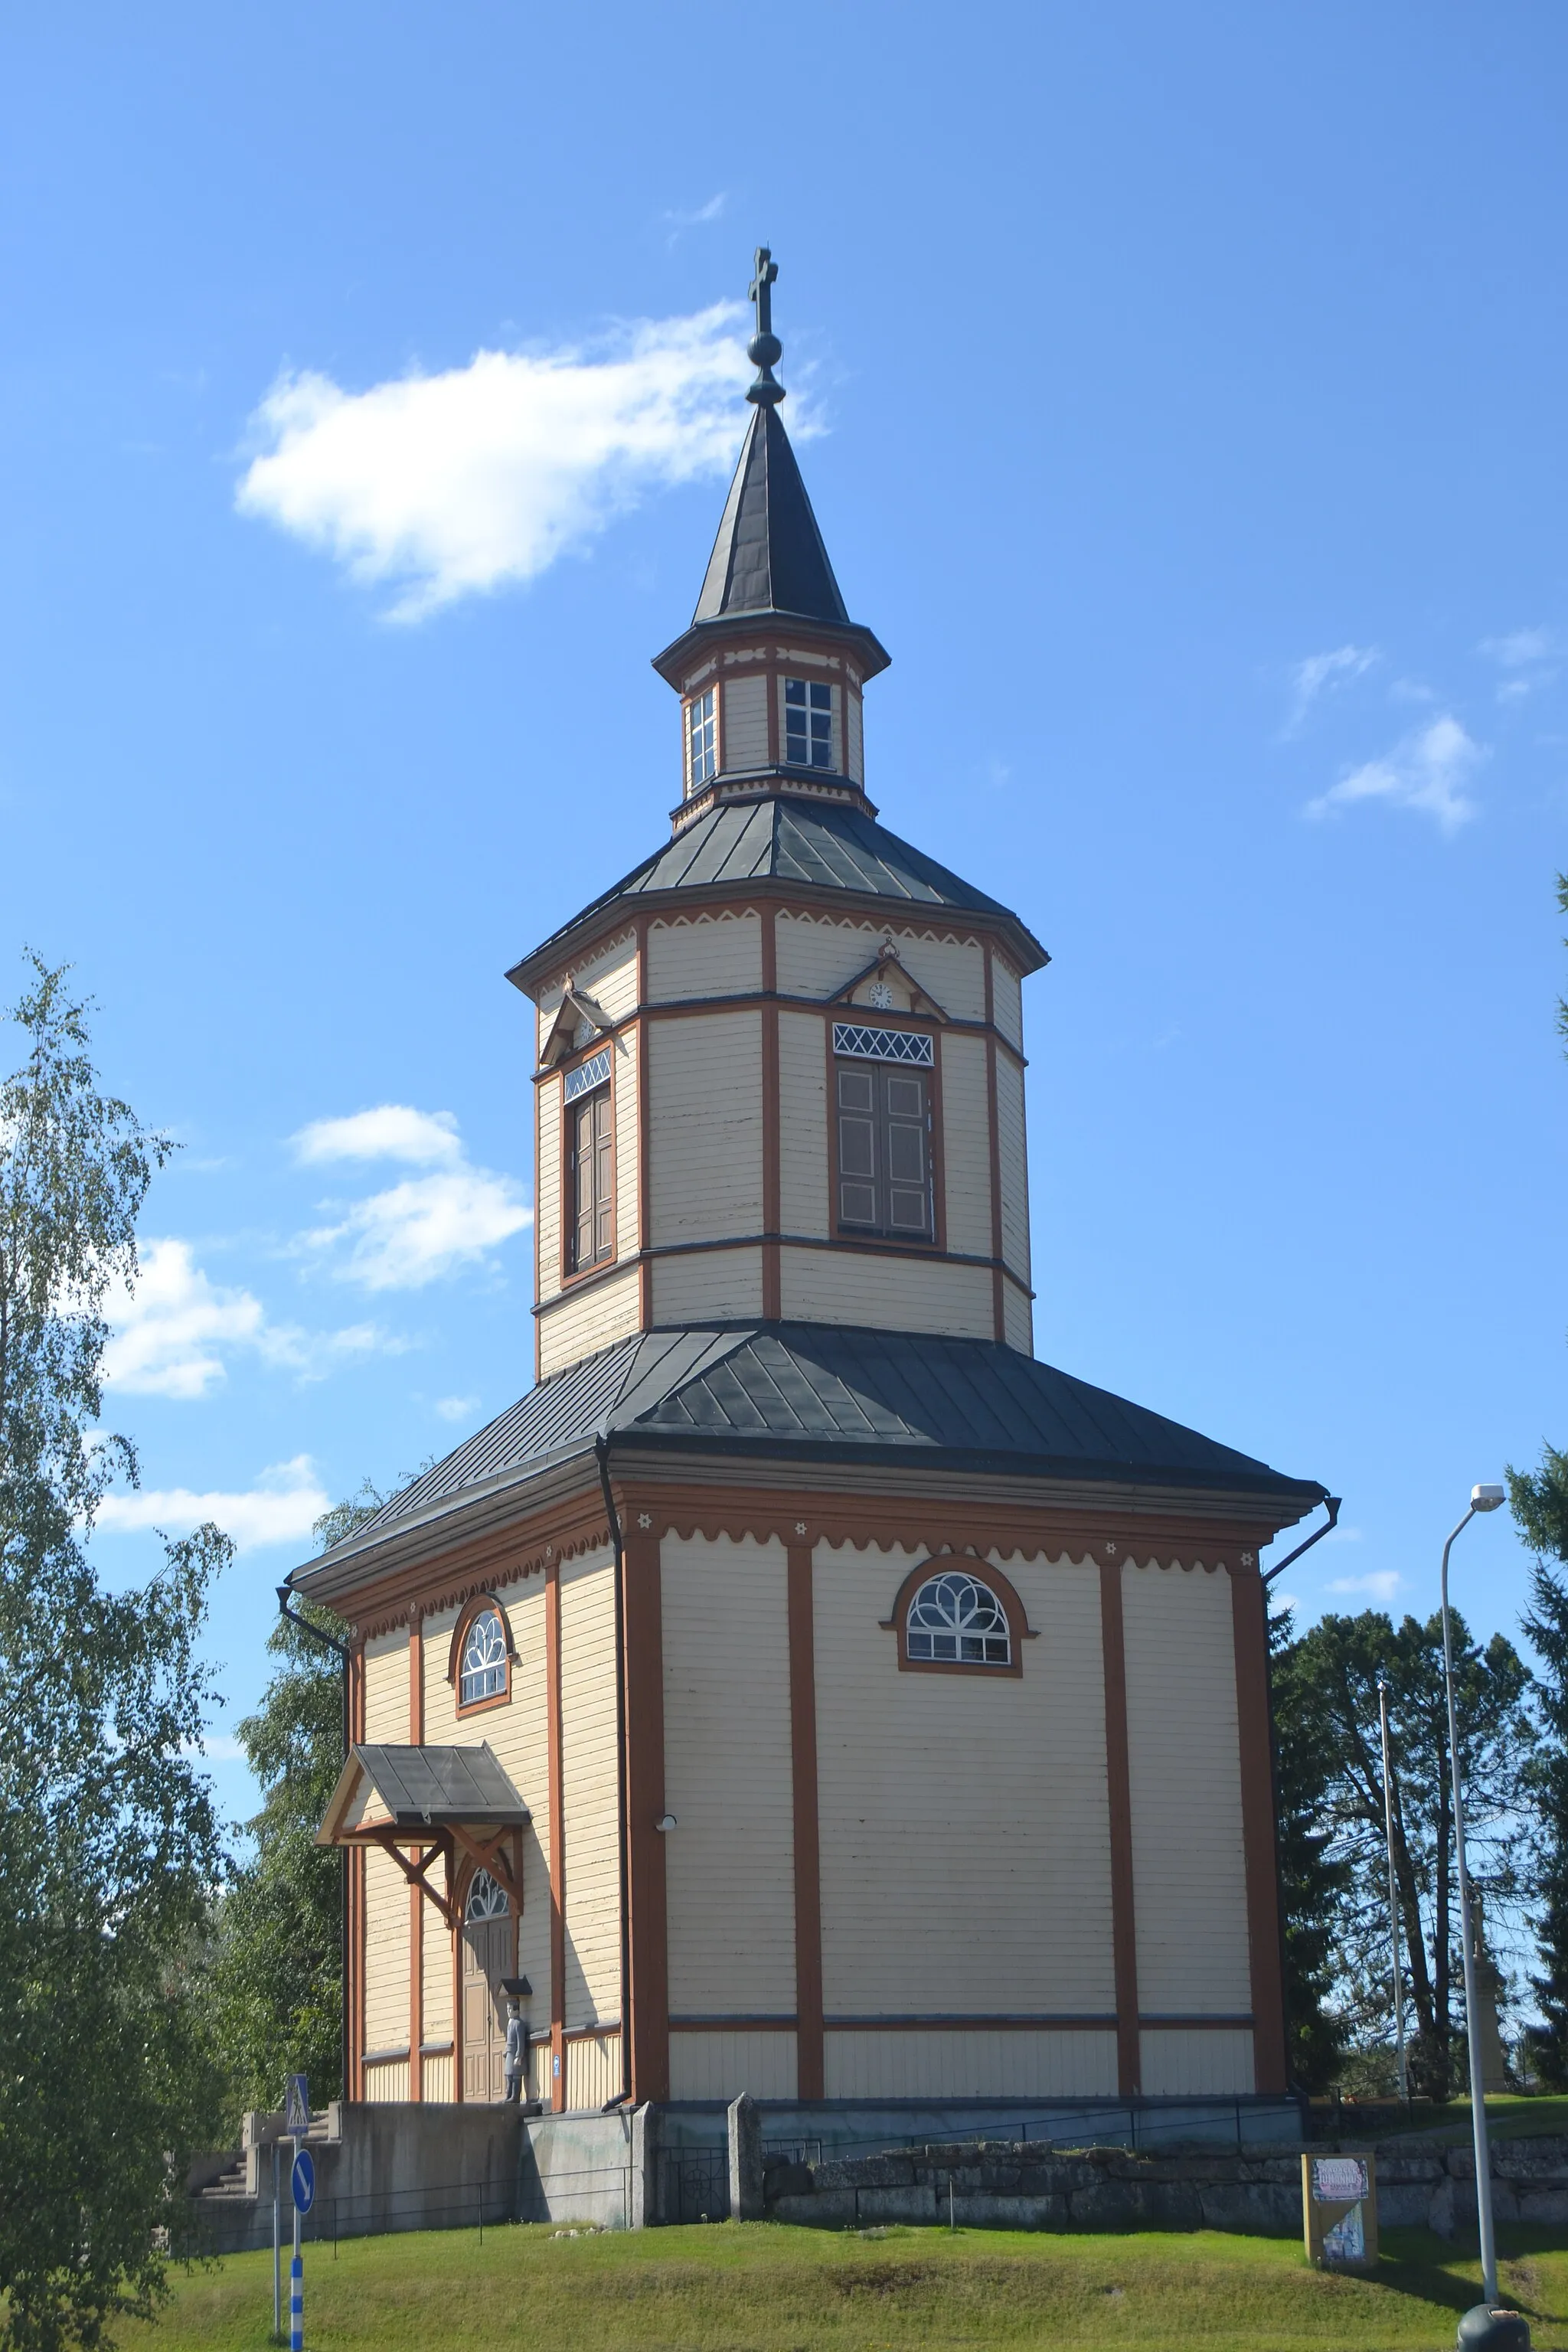 Photo showing: Kannus bell tower in Finland